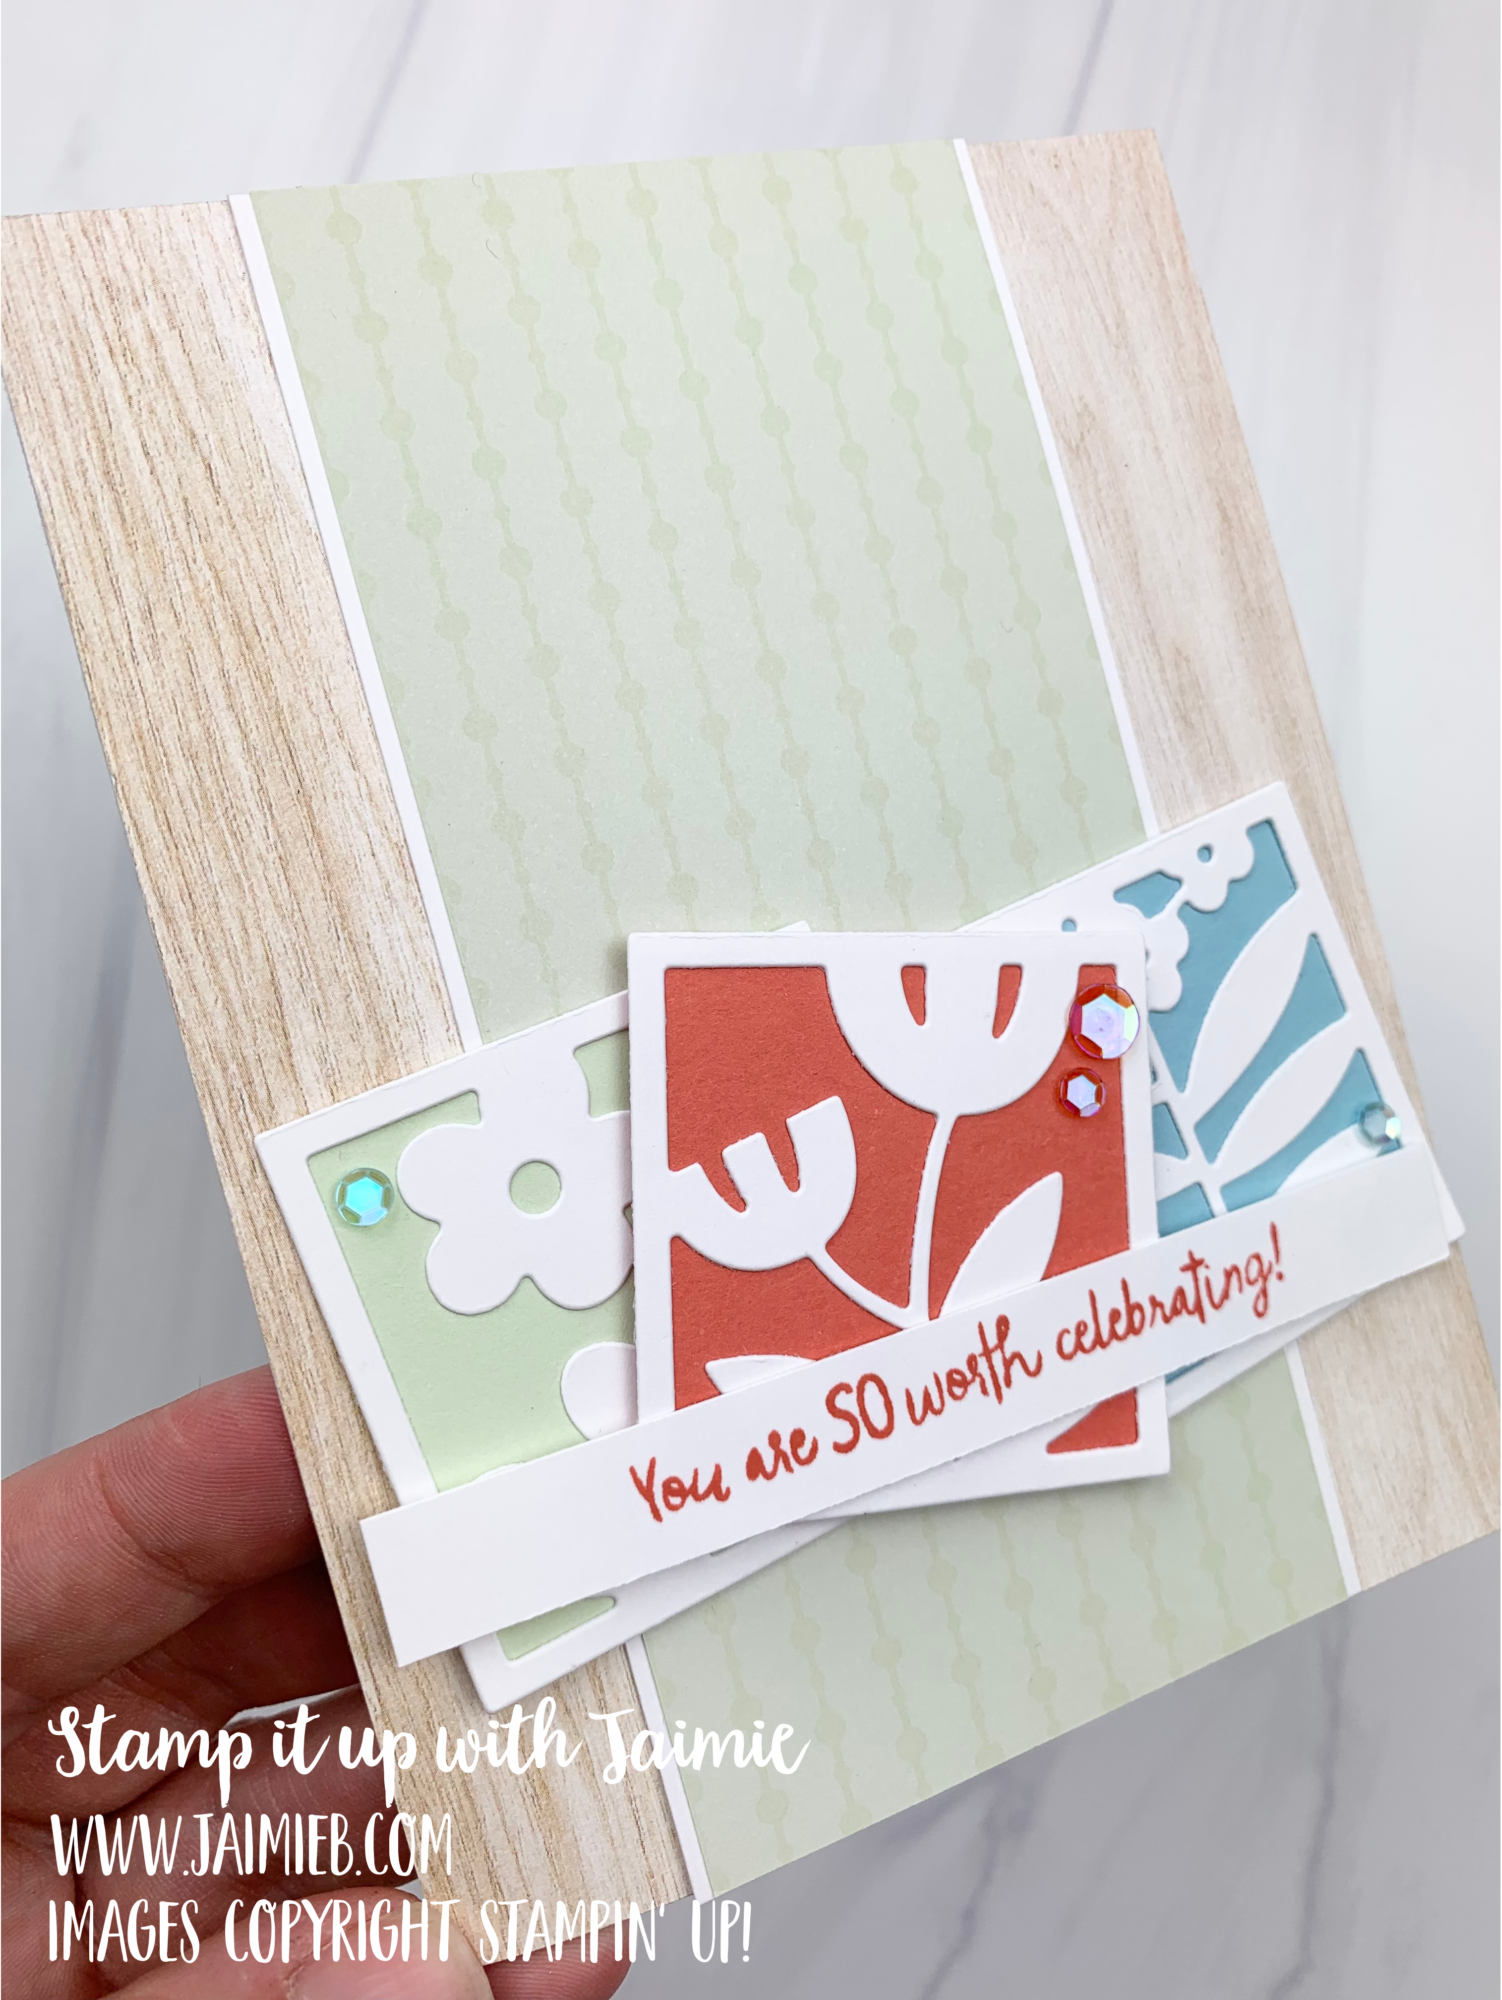 Stampin’ Up! All Squared Away Birthday Card